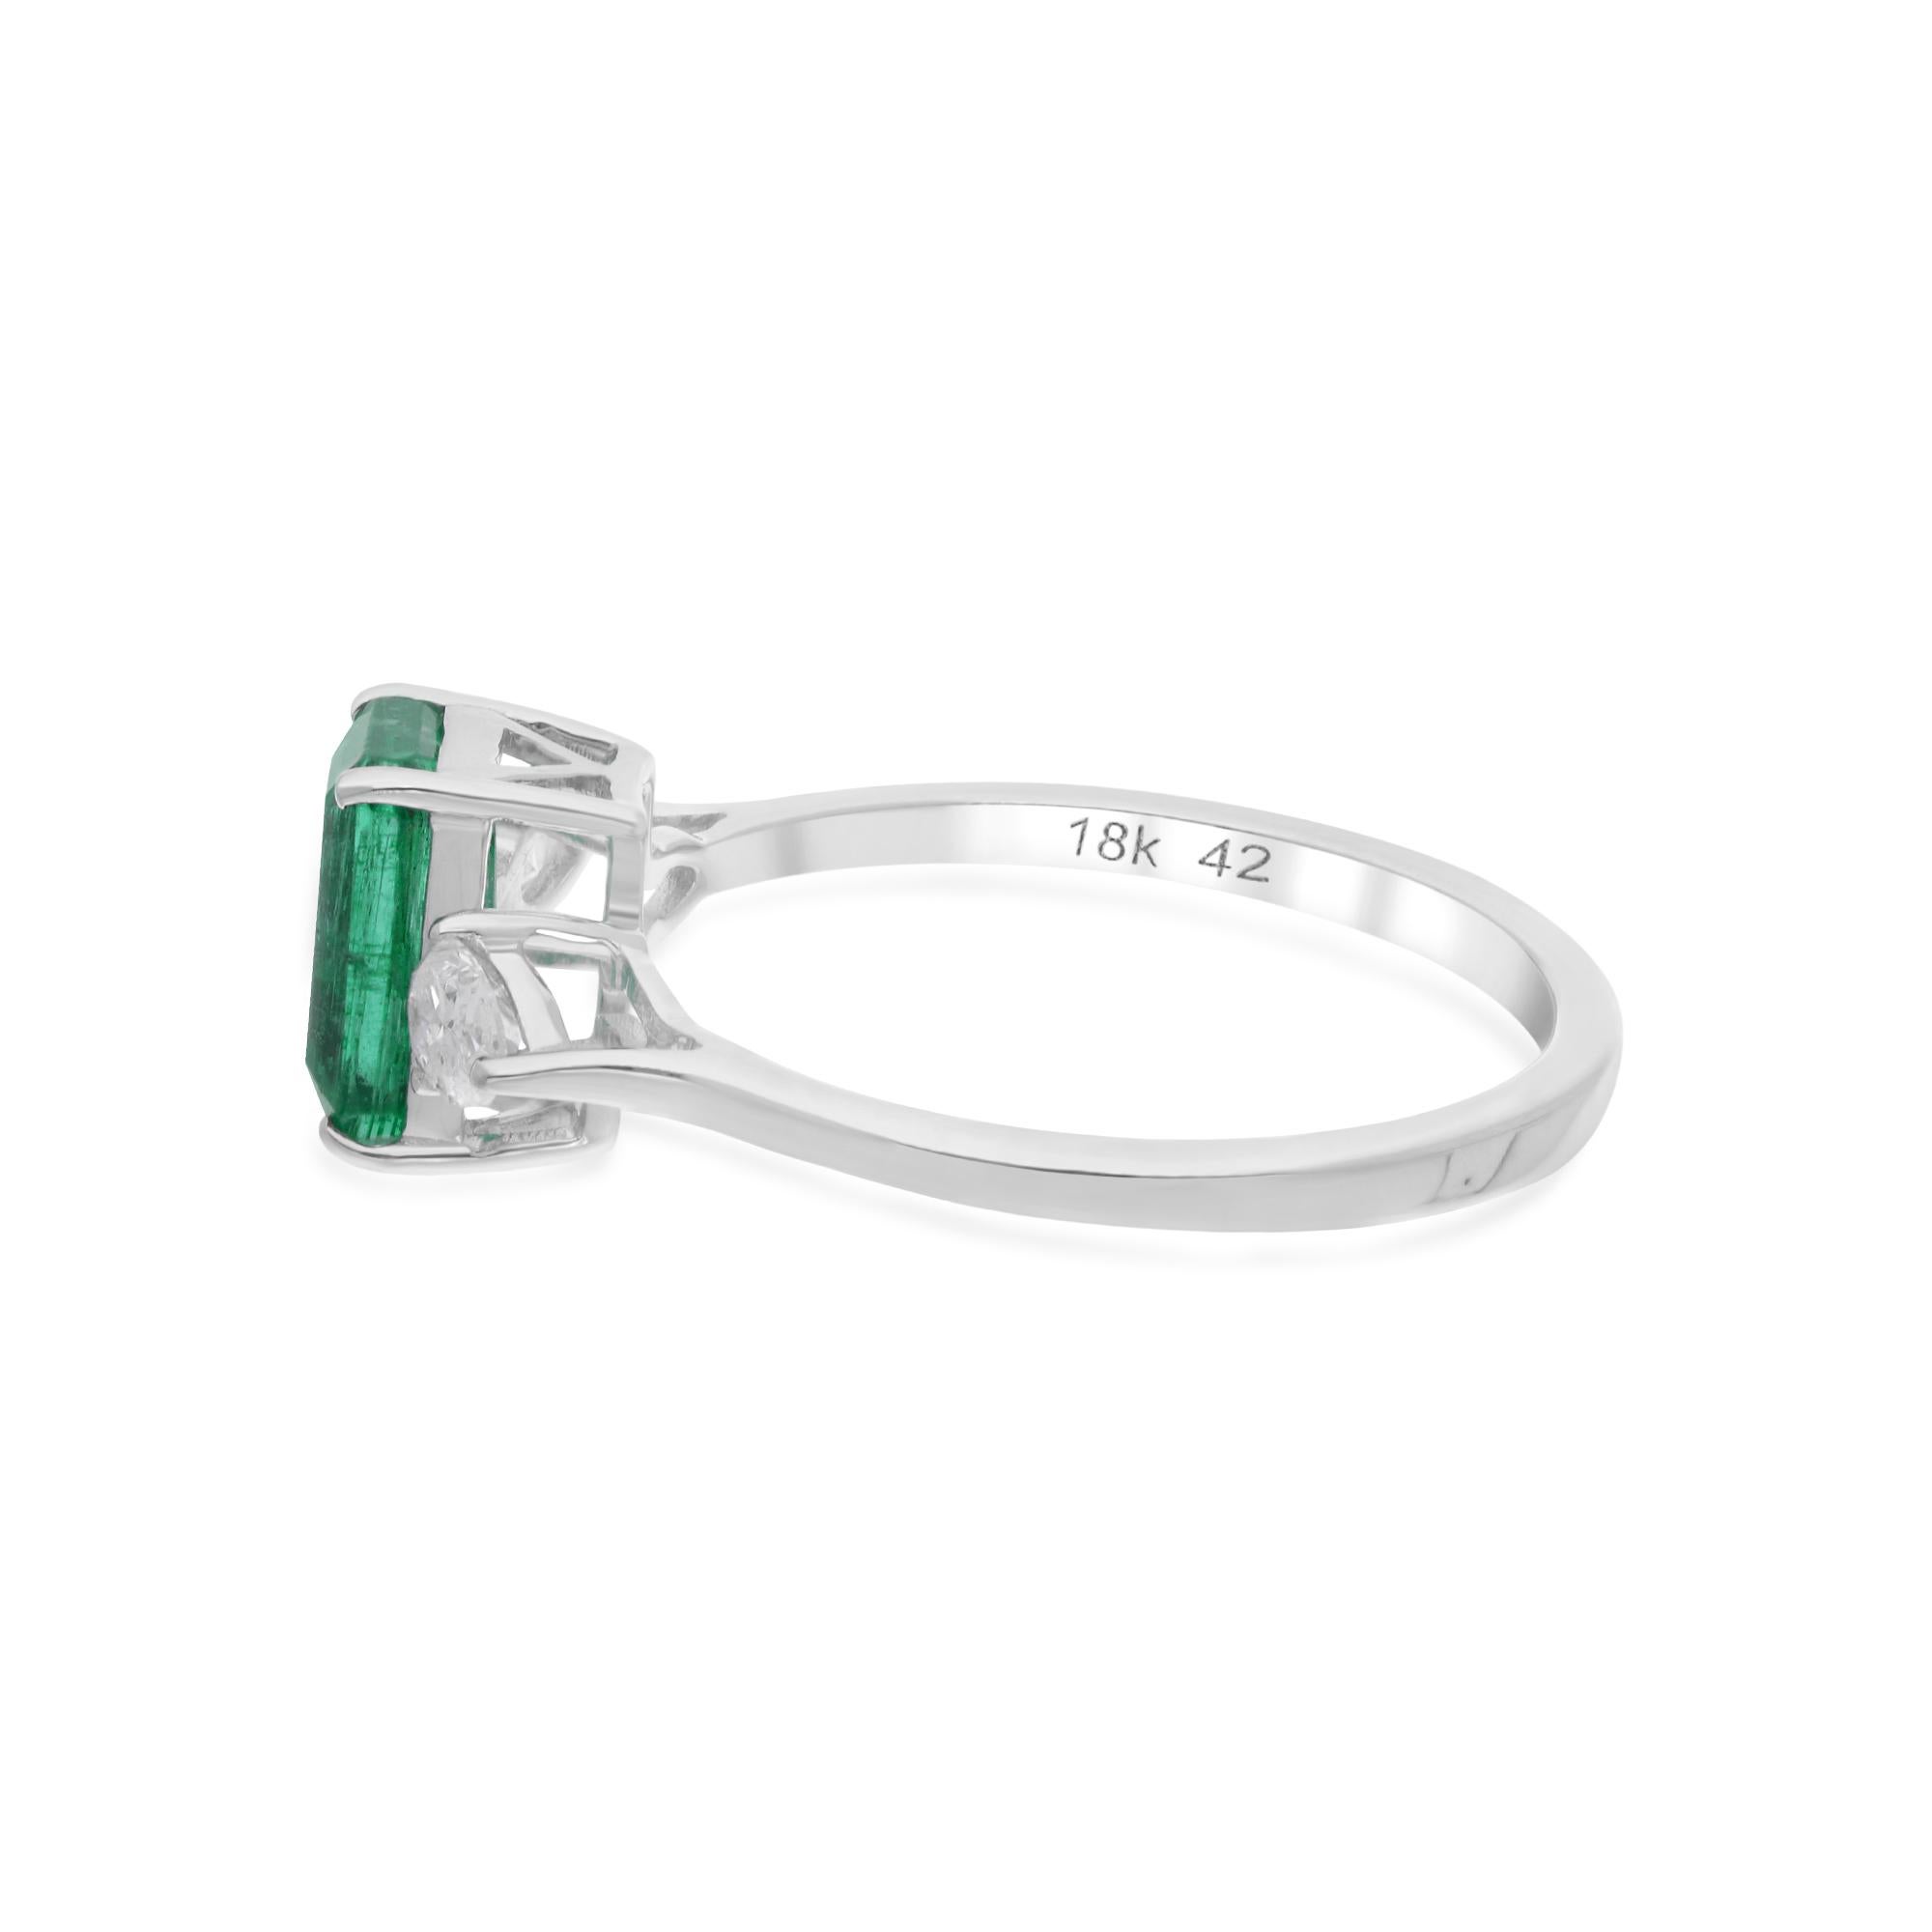 Introducing the epitome of elegance and sophistication: the Natural Zambian Emerald Gemstone Ring adorned with Pear Diamonds, meticulously crafted in luxurious 18 Karat White Gold. This exquisite ring is a true testament to timeless beauty and